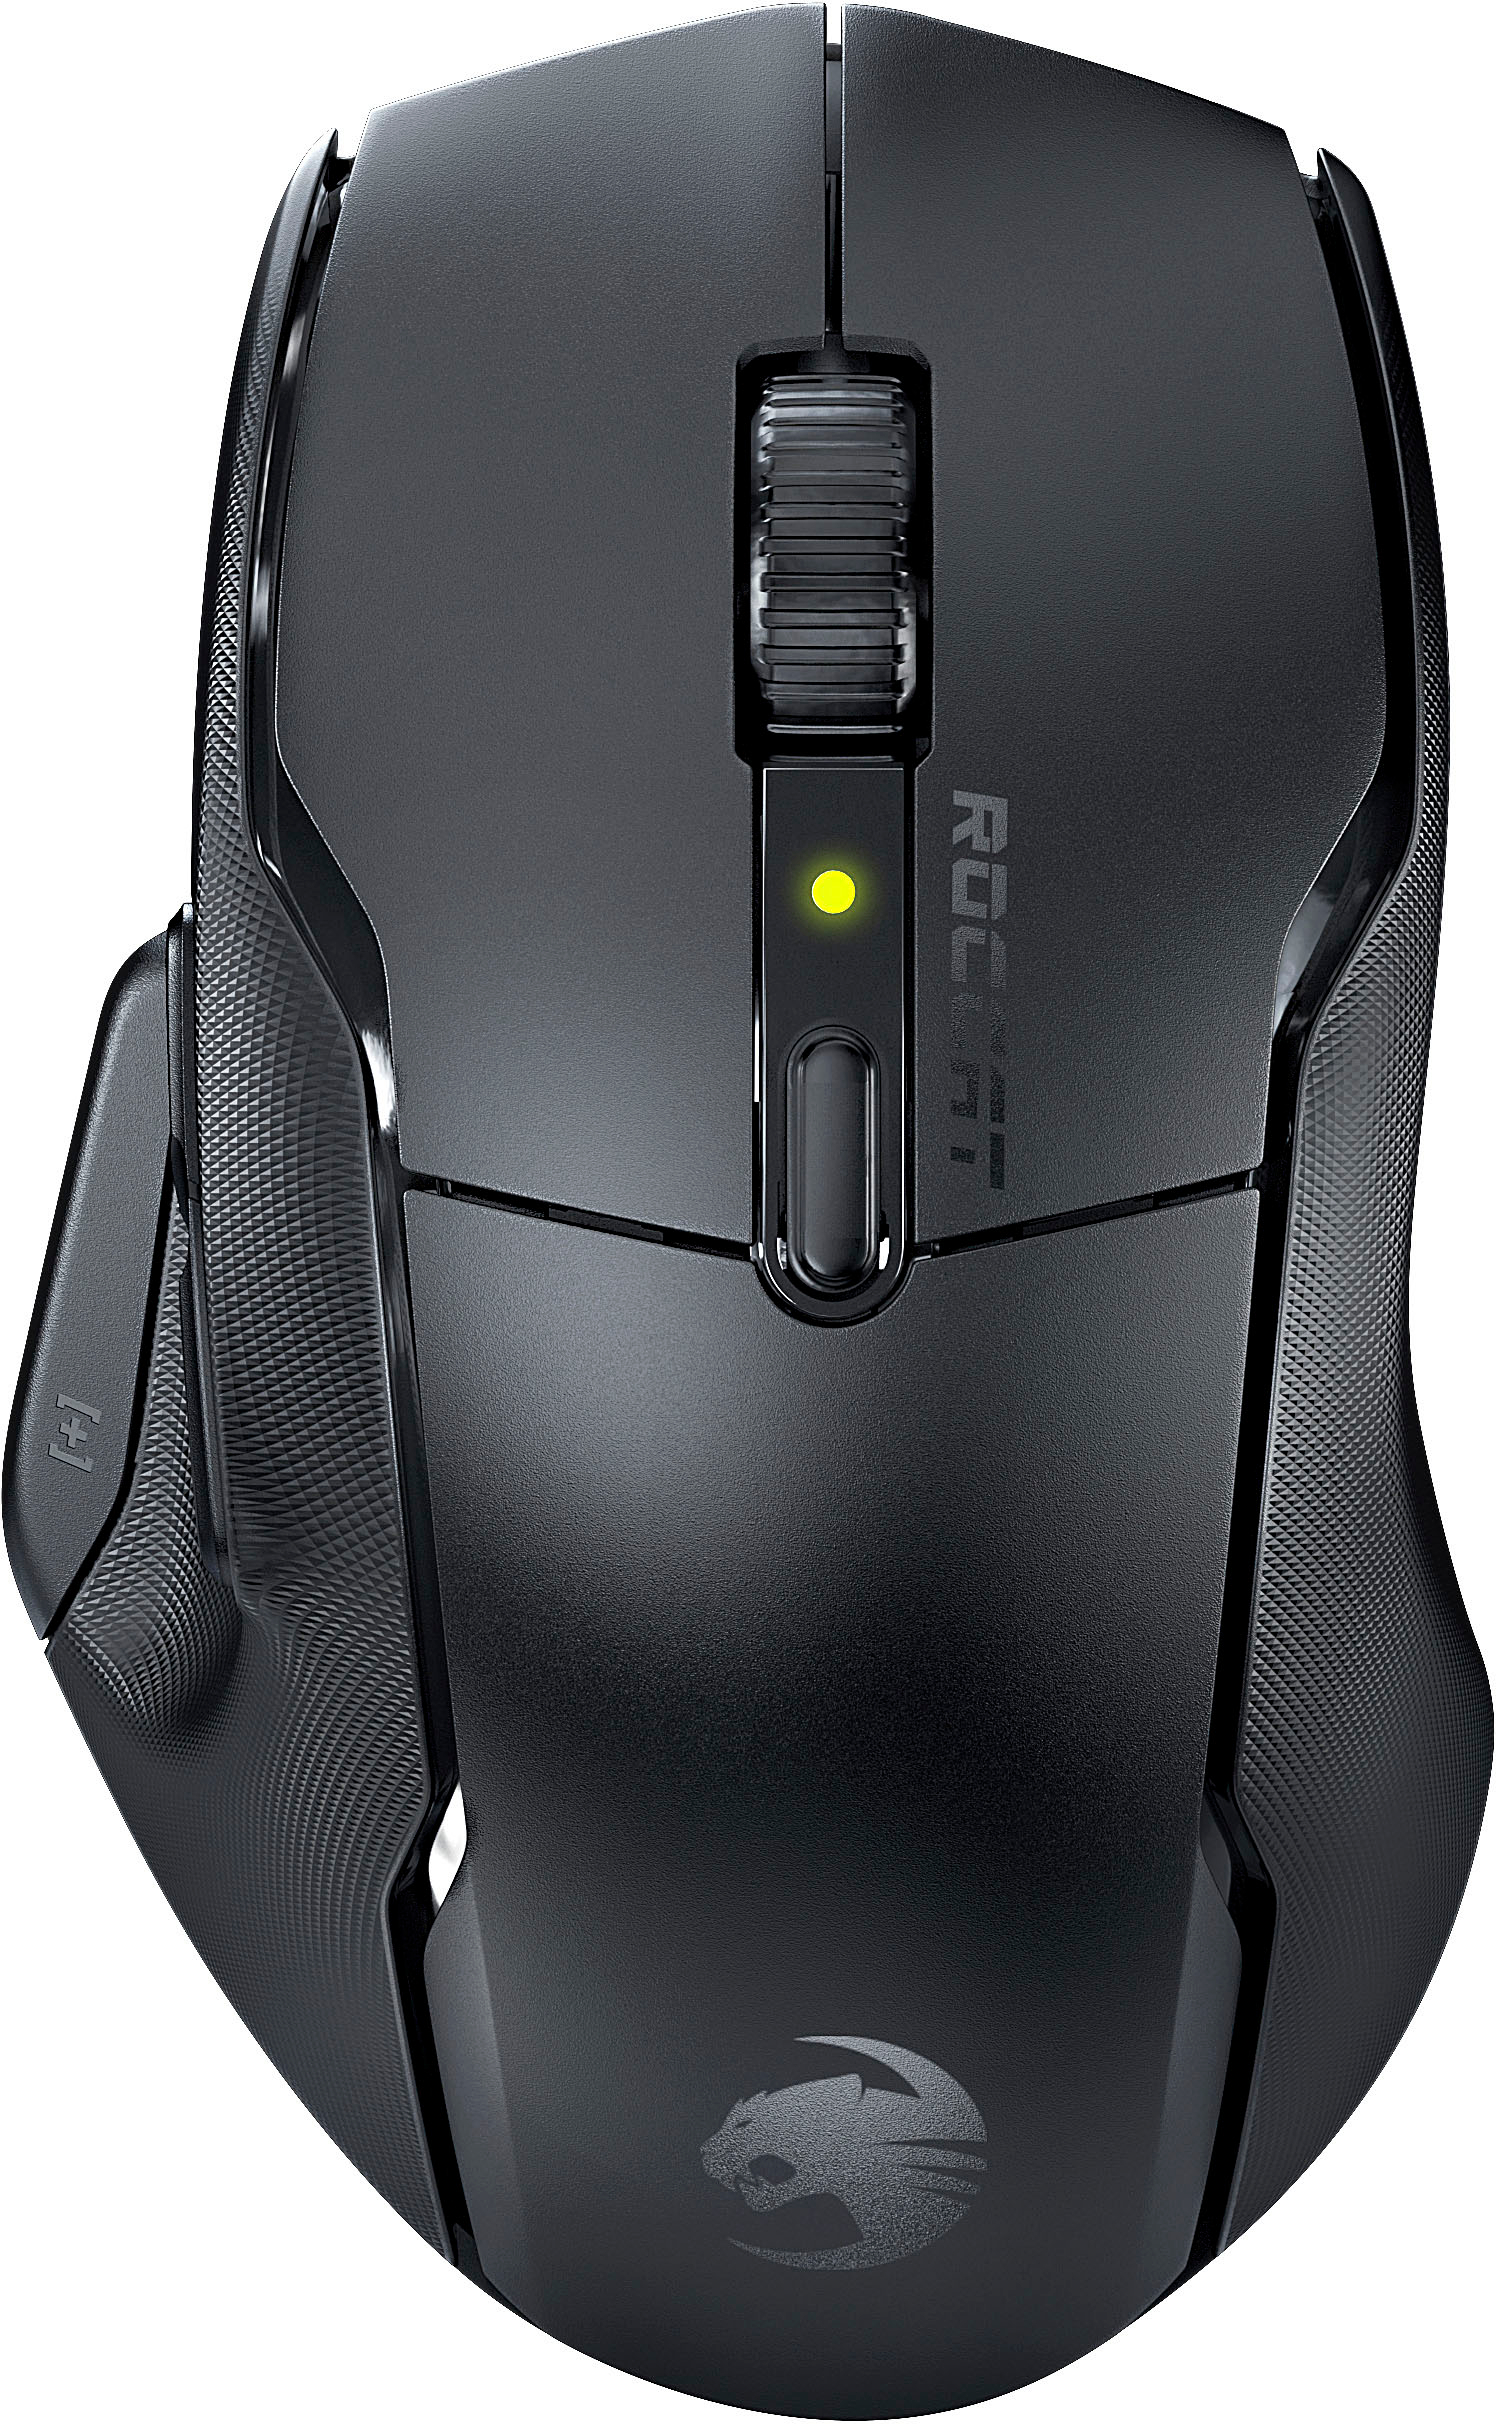 with Button Ergonomic Black Buy Kone Wireless ROC-11-450-01 Gaming Mouse Air - Programmable Best Design ROCCAT Optical